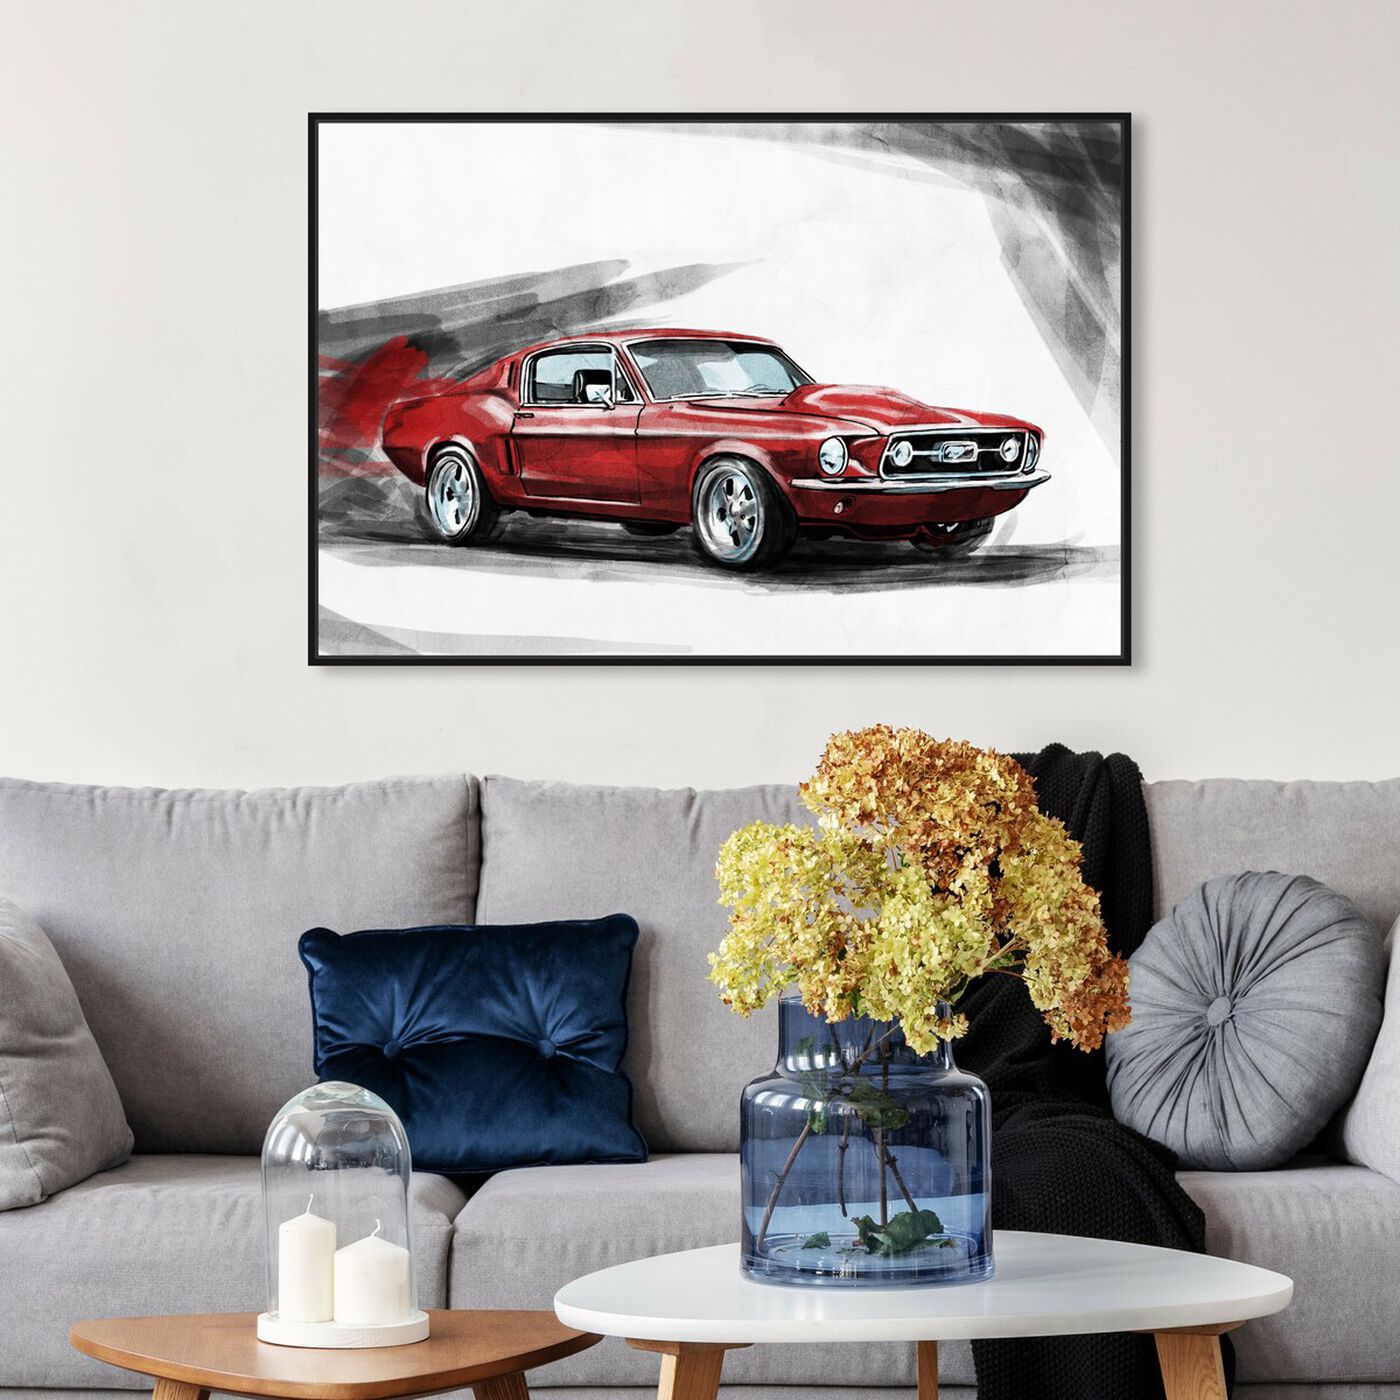 Hanging view of Red Beauty featuring transportation and automobiles art.